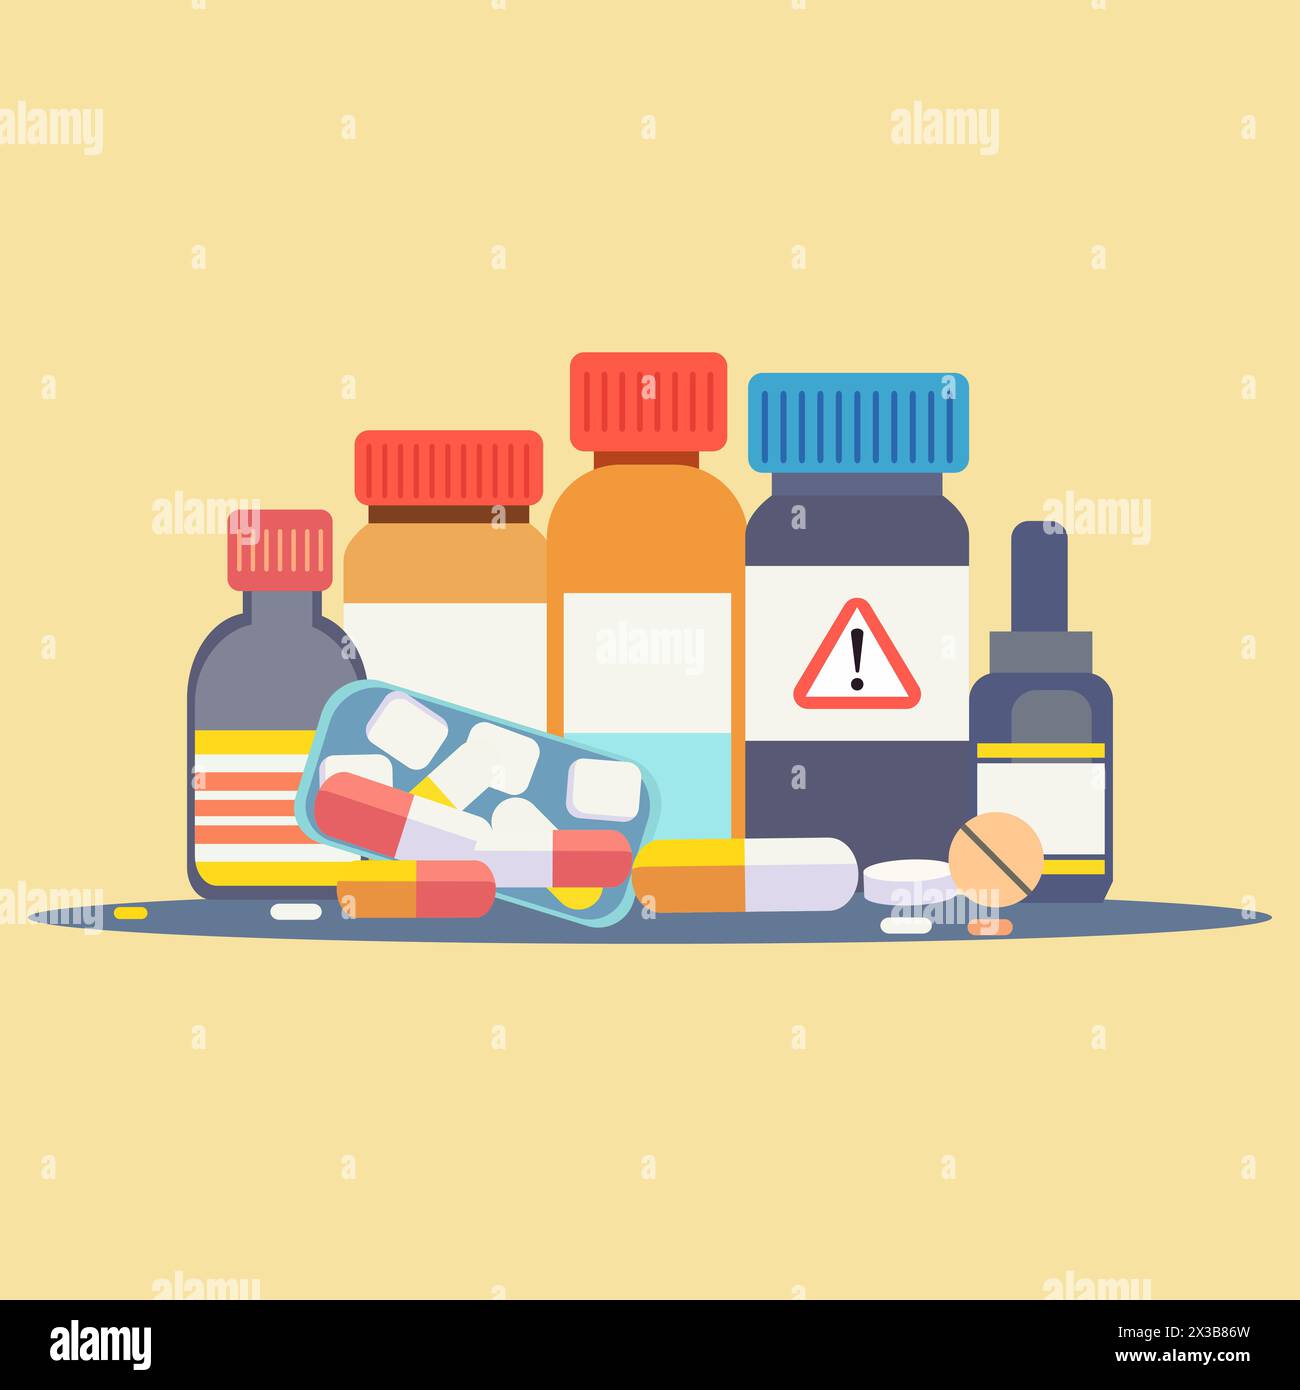 No Drugs Day with Dangerous Narcotic Hard Medicine Pill in Bottle Stock Vector